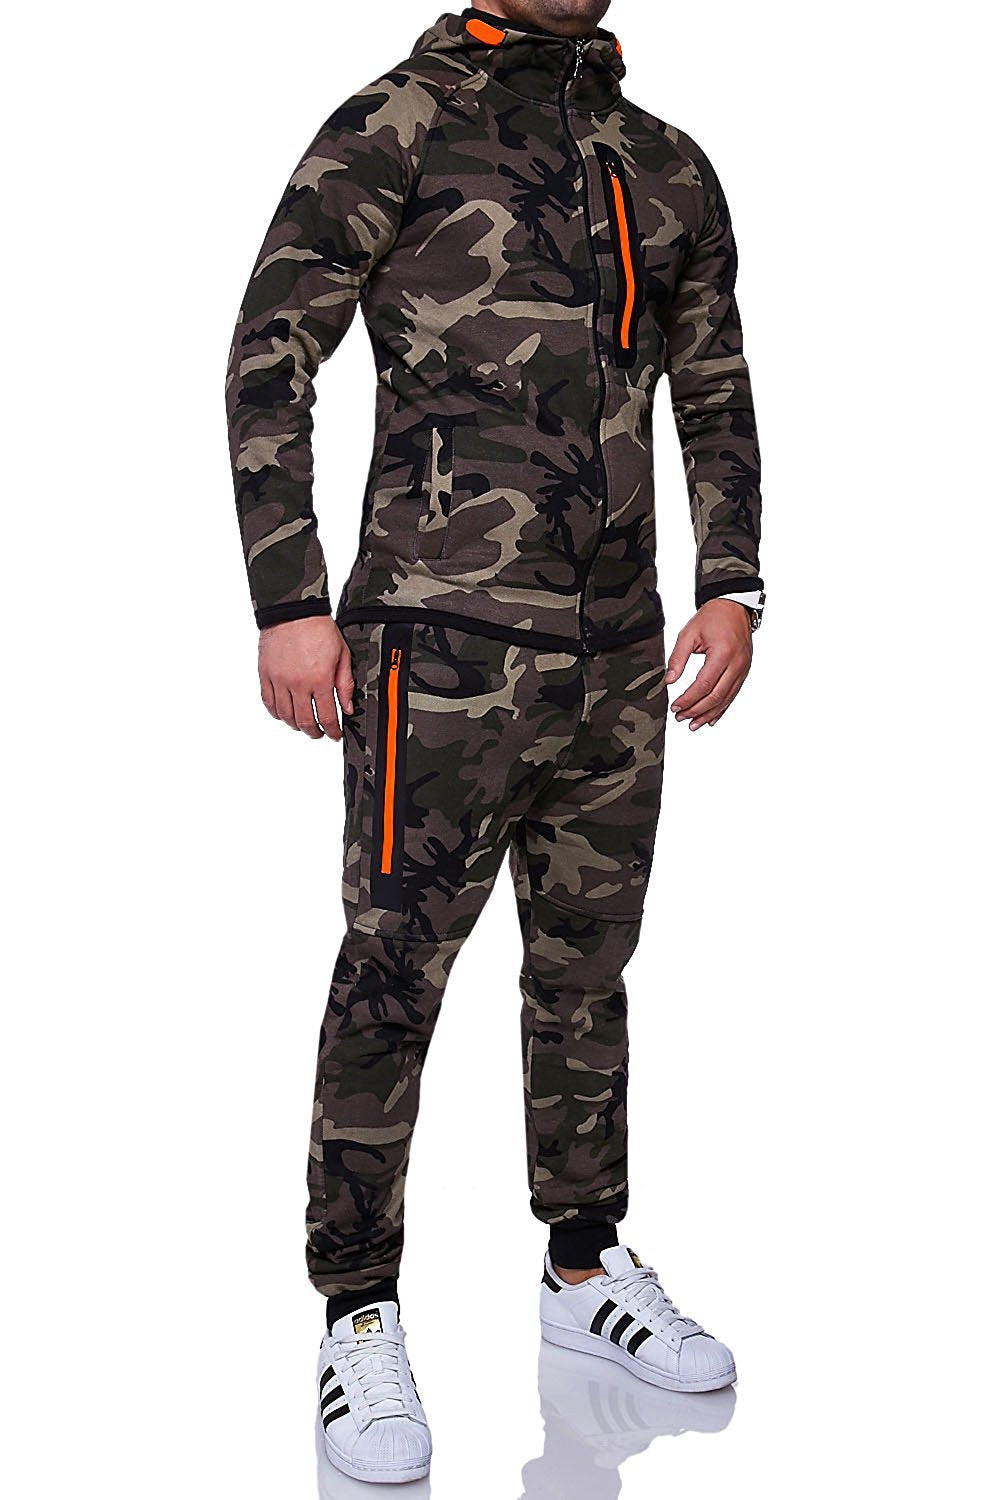 Hoodies camouflage sports suit